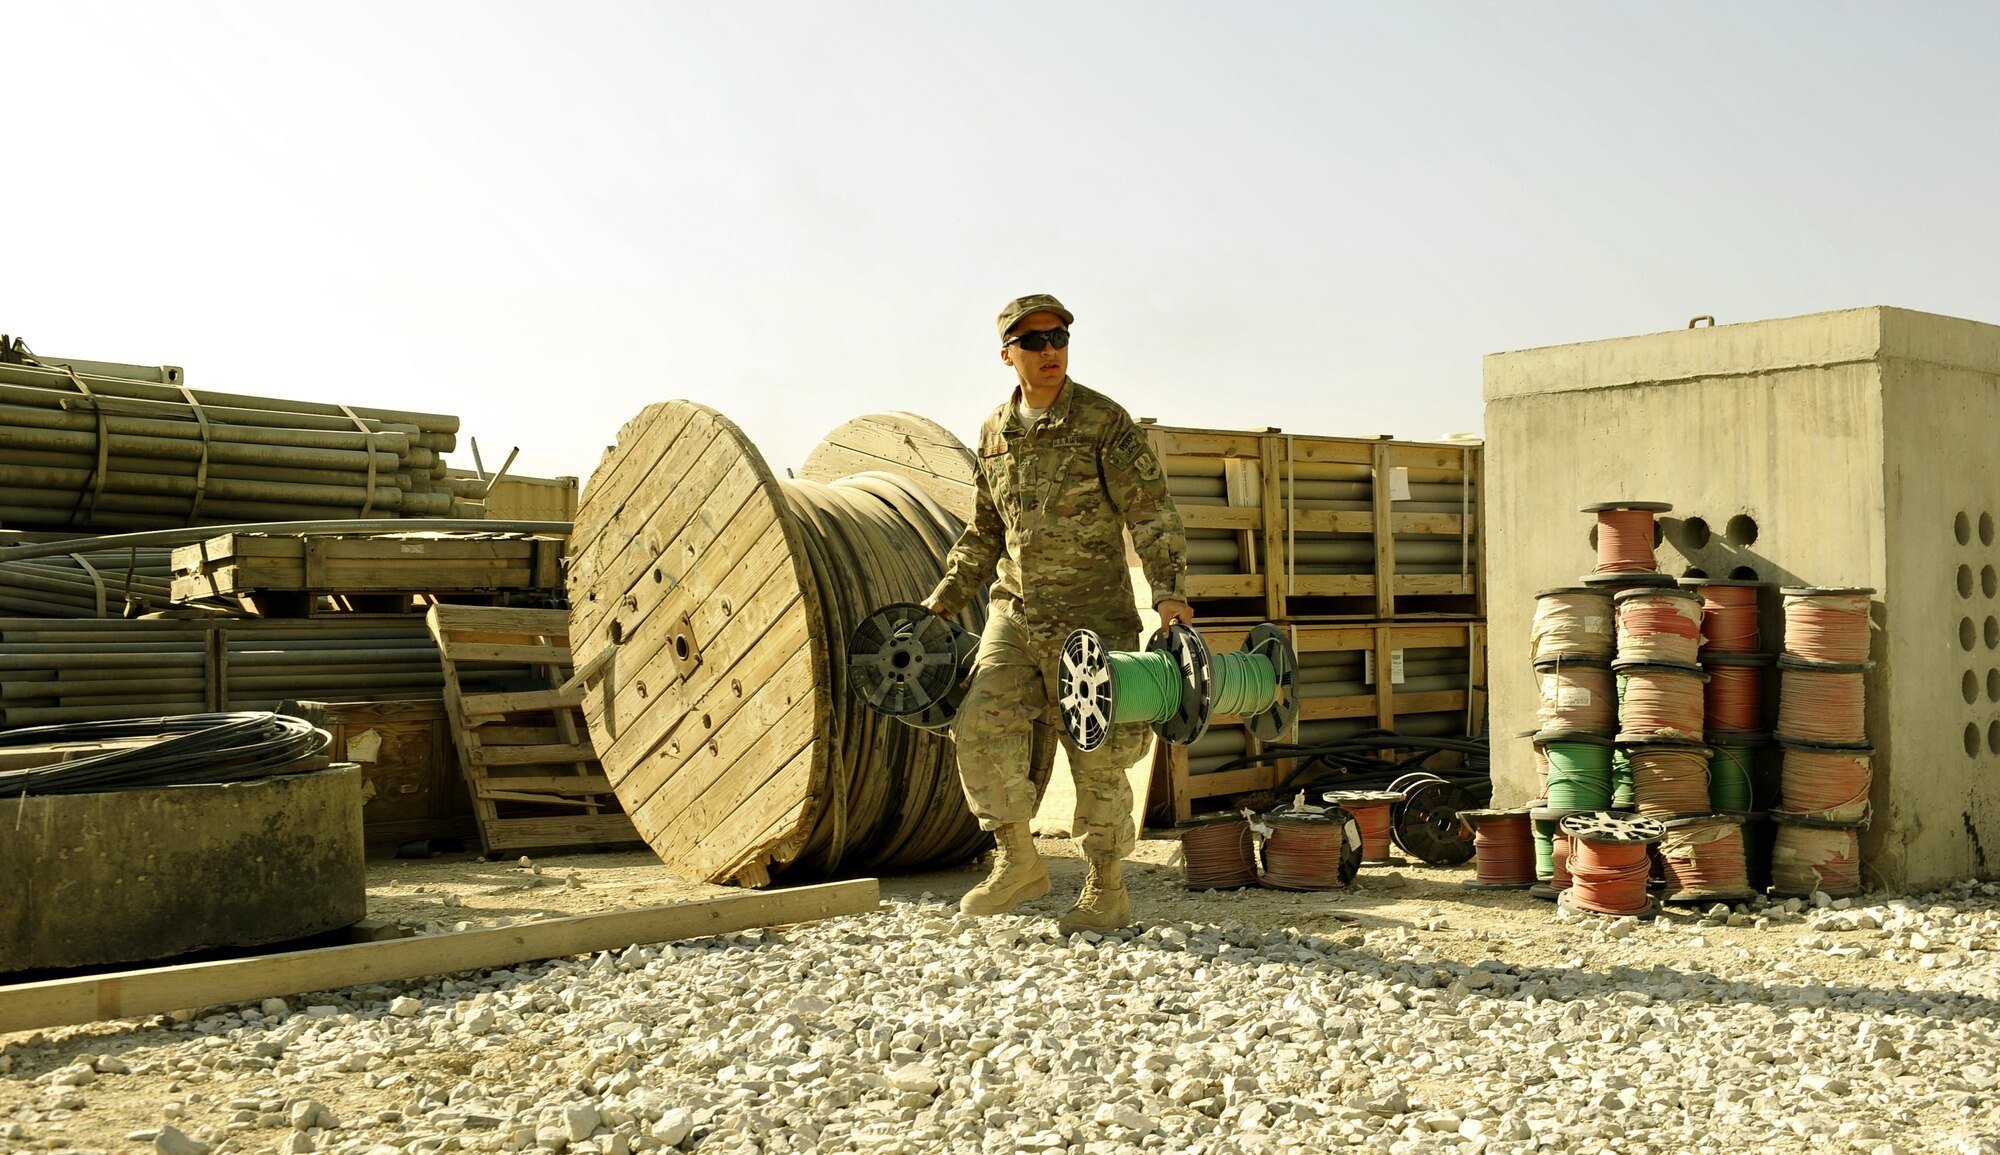 Senior Airman Randel Gutierrez, 455th Expeditionary Communications Squadron member, picks up copper cables from the storage yard on Bagram Airfield, Afghanistan.  Gutierrez is deployed from Hill Air Force Base, Utah. (U.S. Air Force photo/ Staff Sgt. Stephenie Wade)